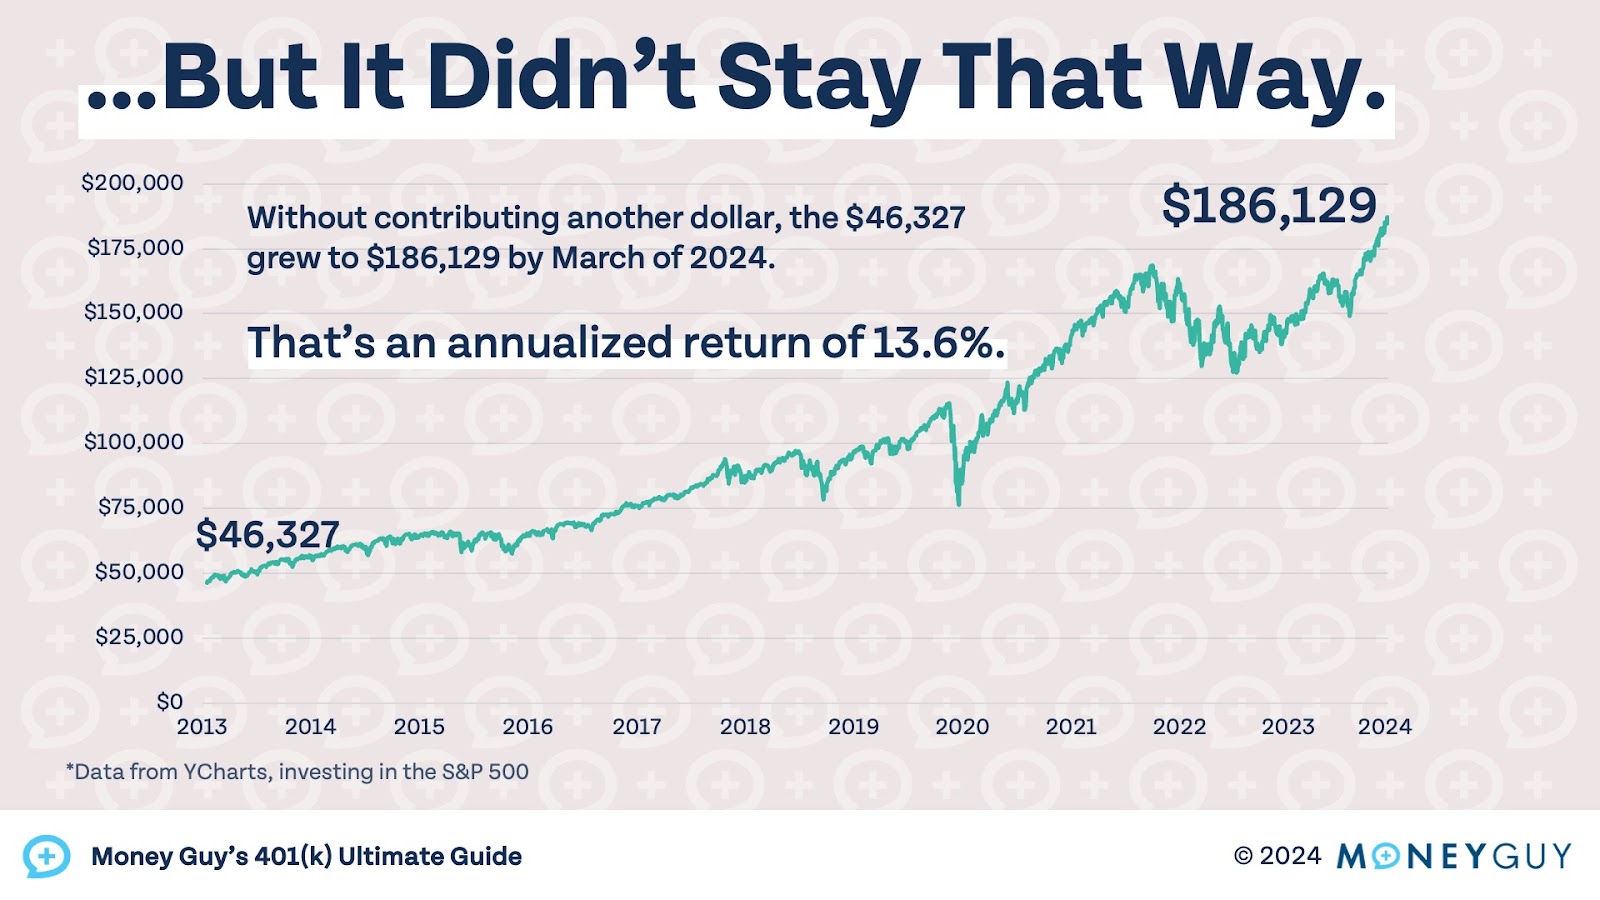 A chart showing how the stock market didn't stay flat and went up after 2013.